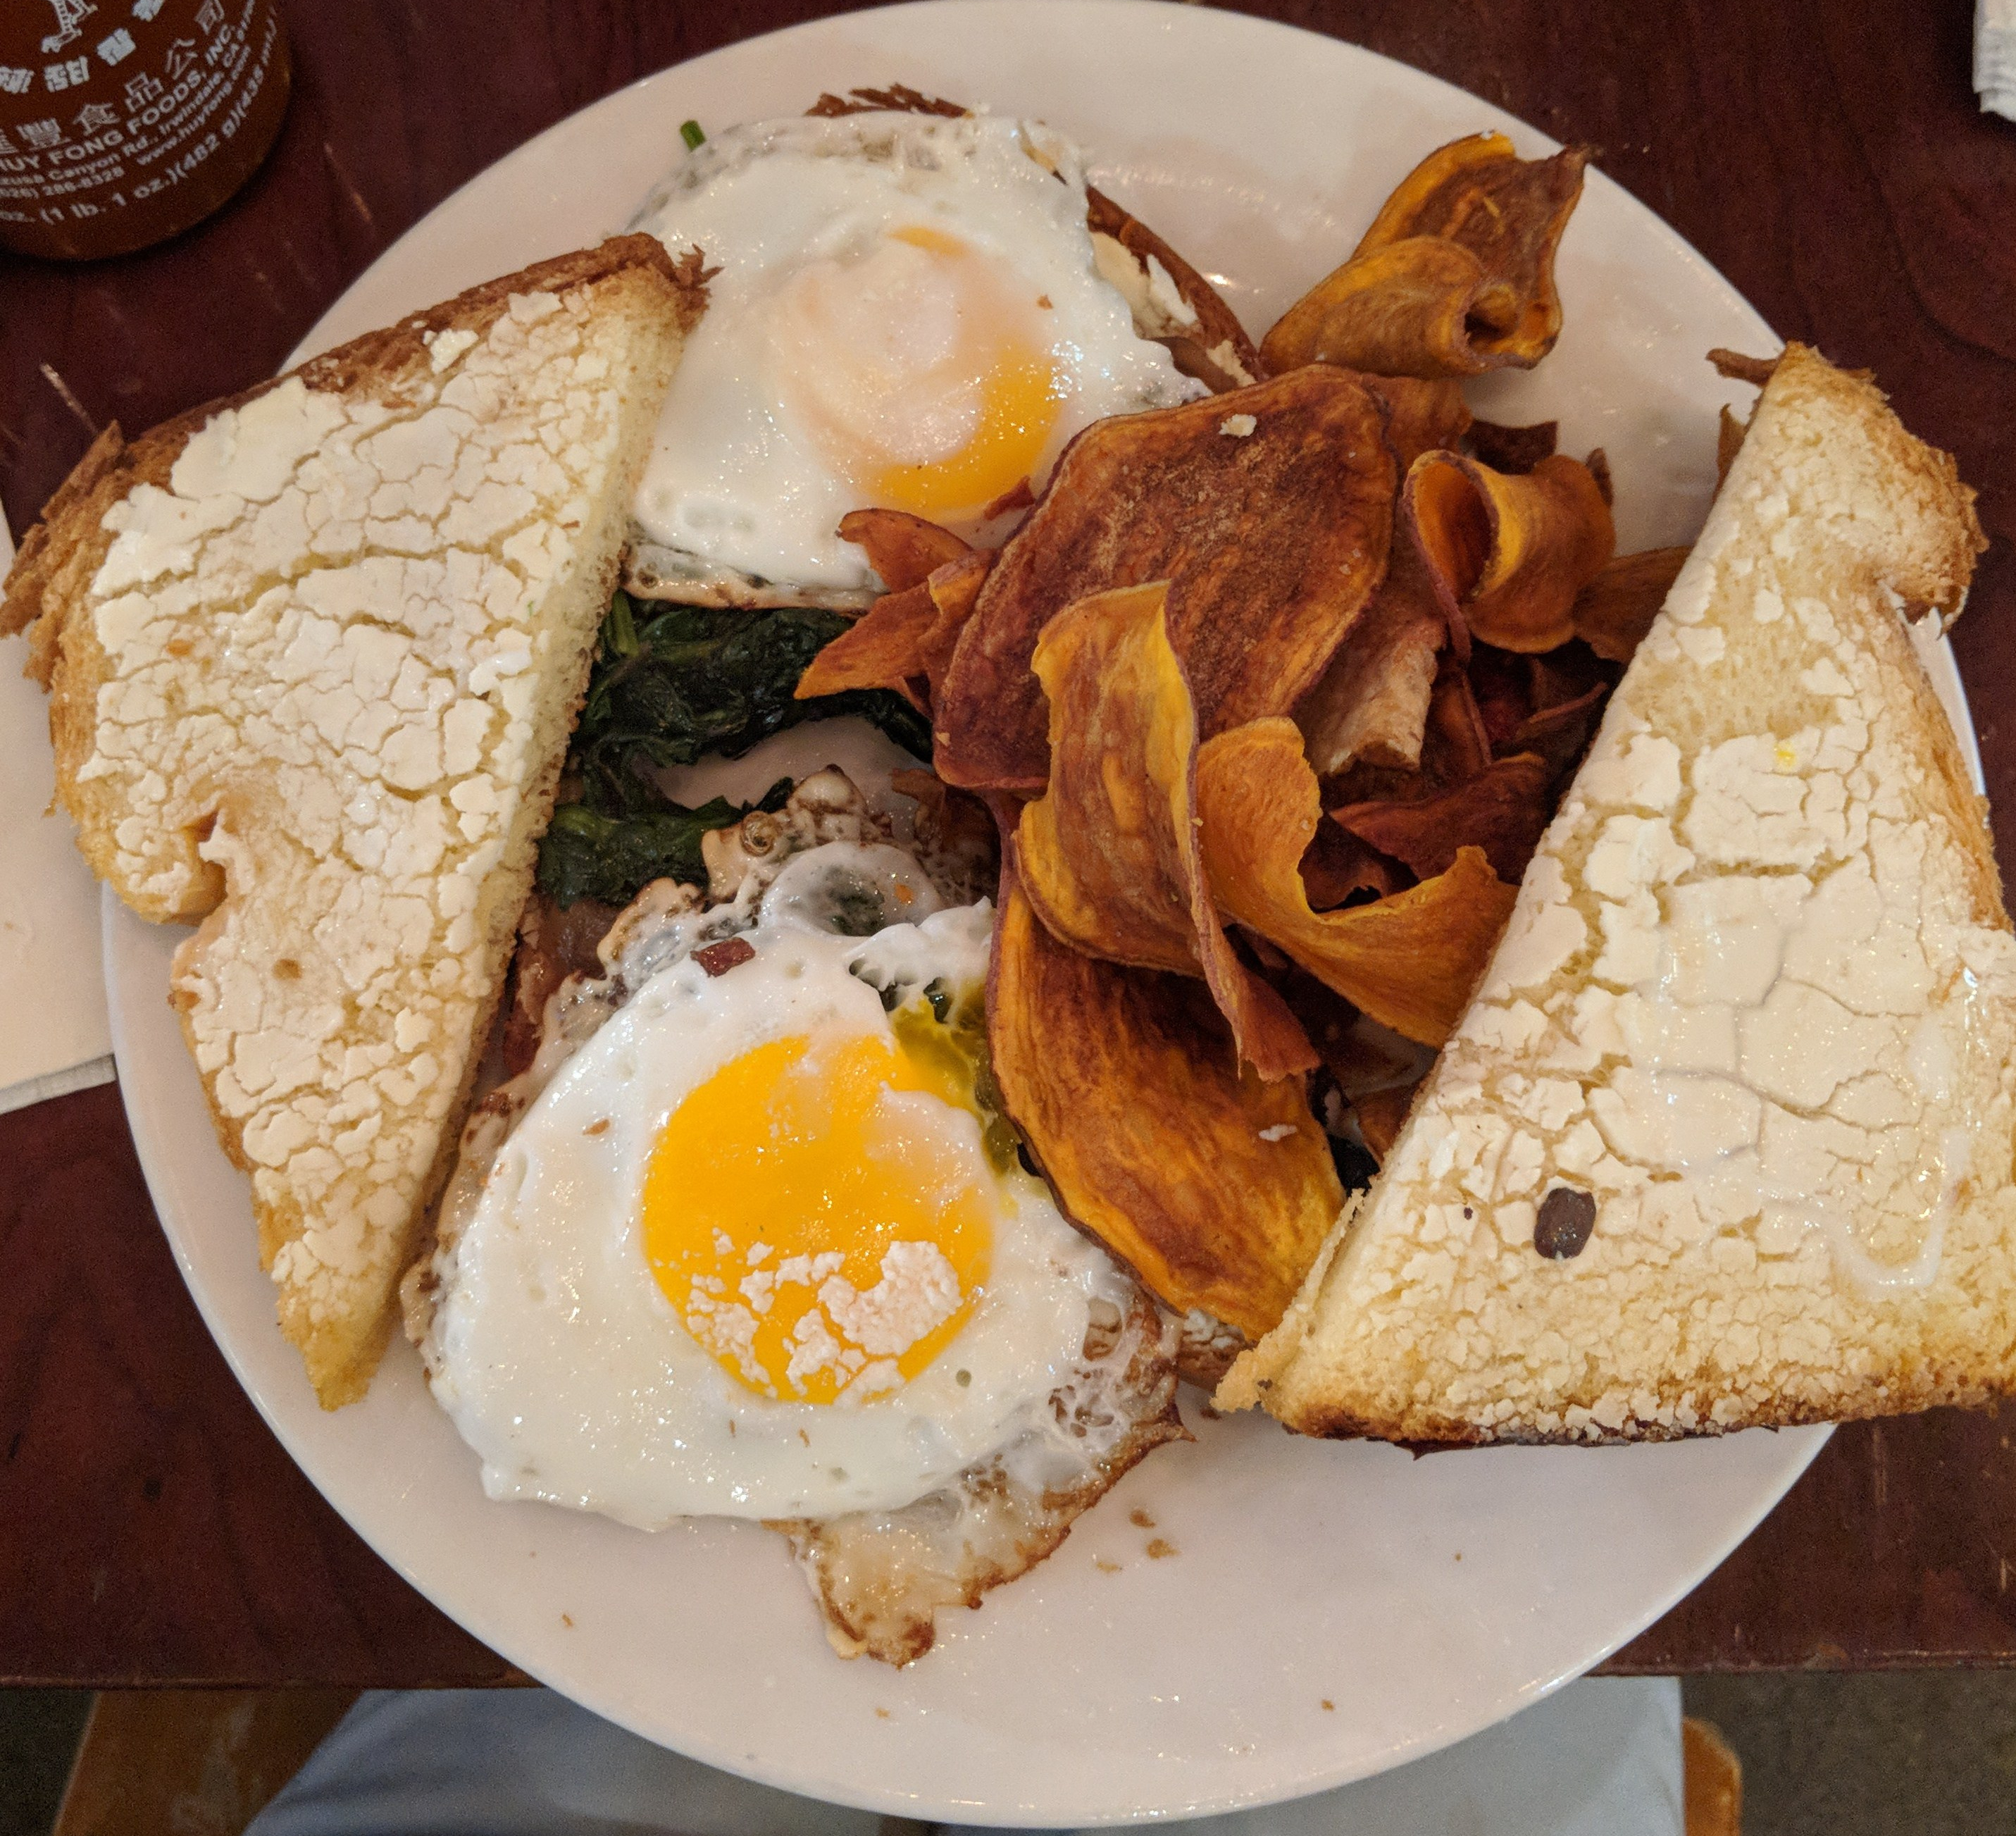 'Not Your Mamma's Grilled Cheese Sandwich' (with added sunny side up egg) - Molly Malloy's